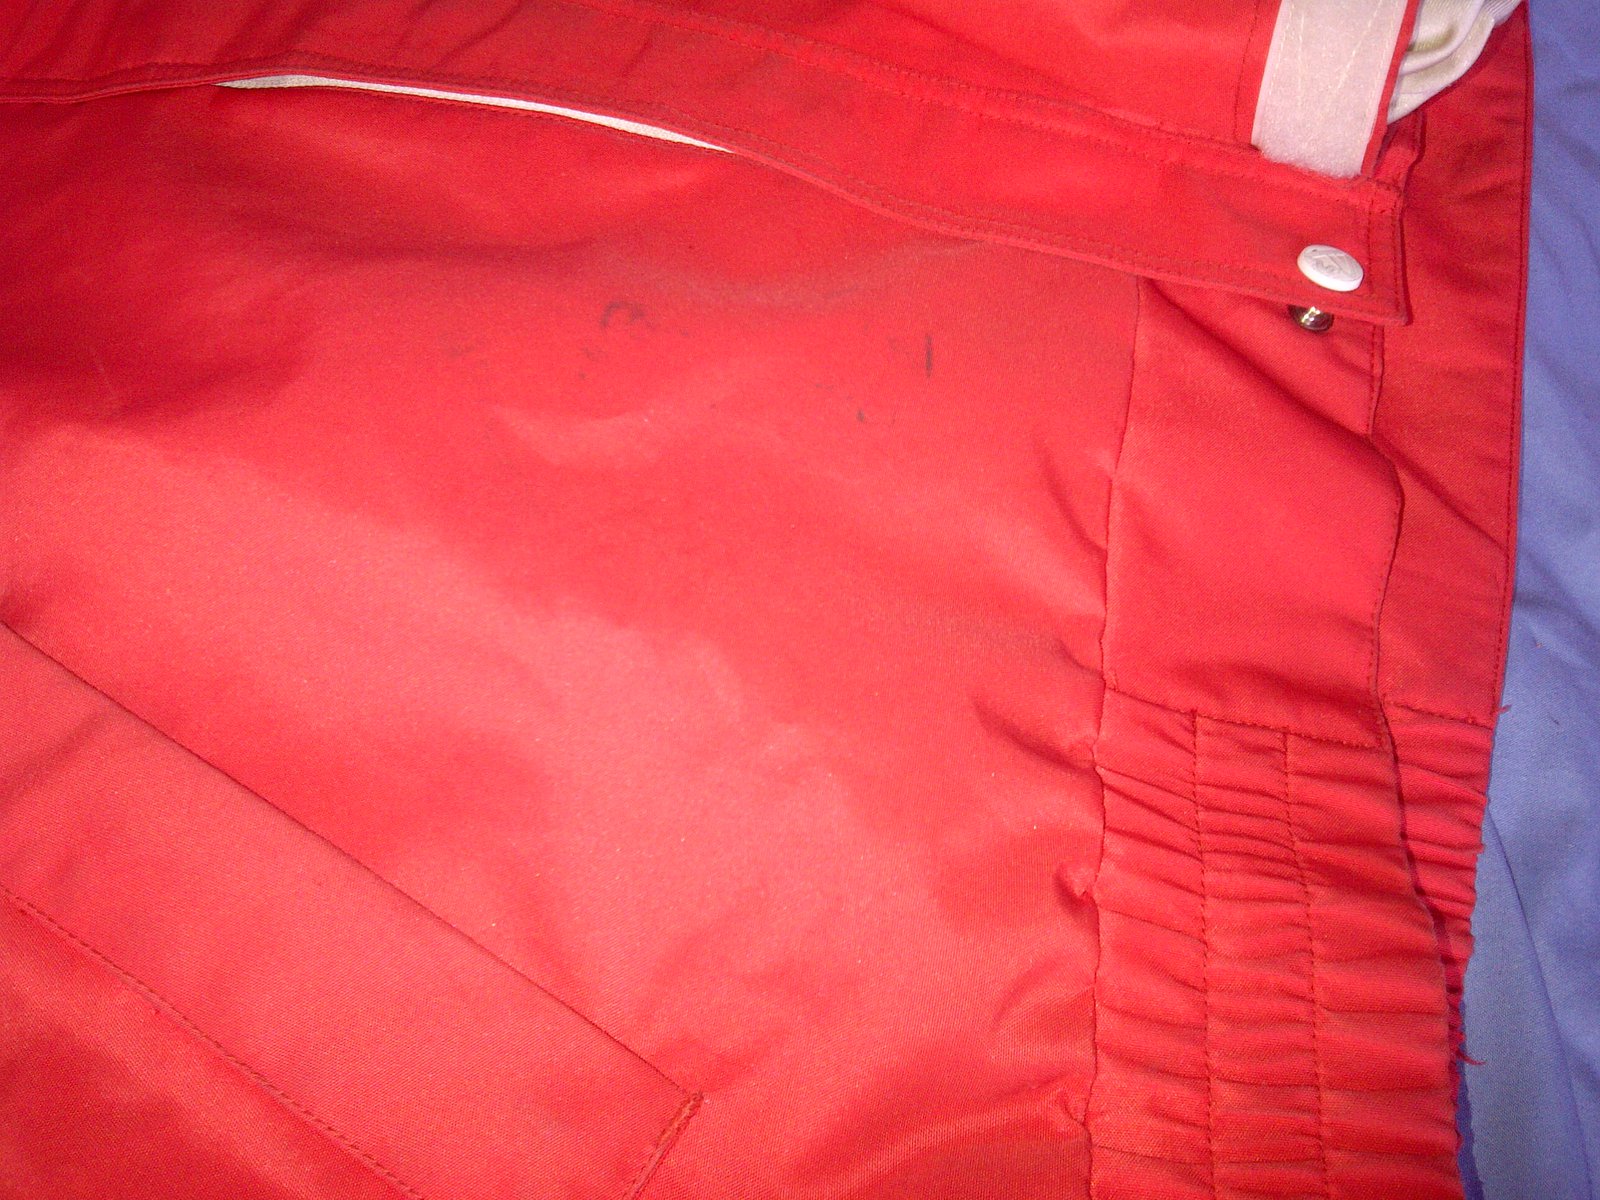 COC jacket stains